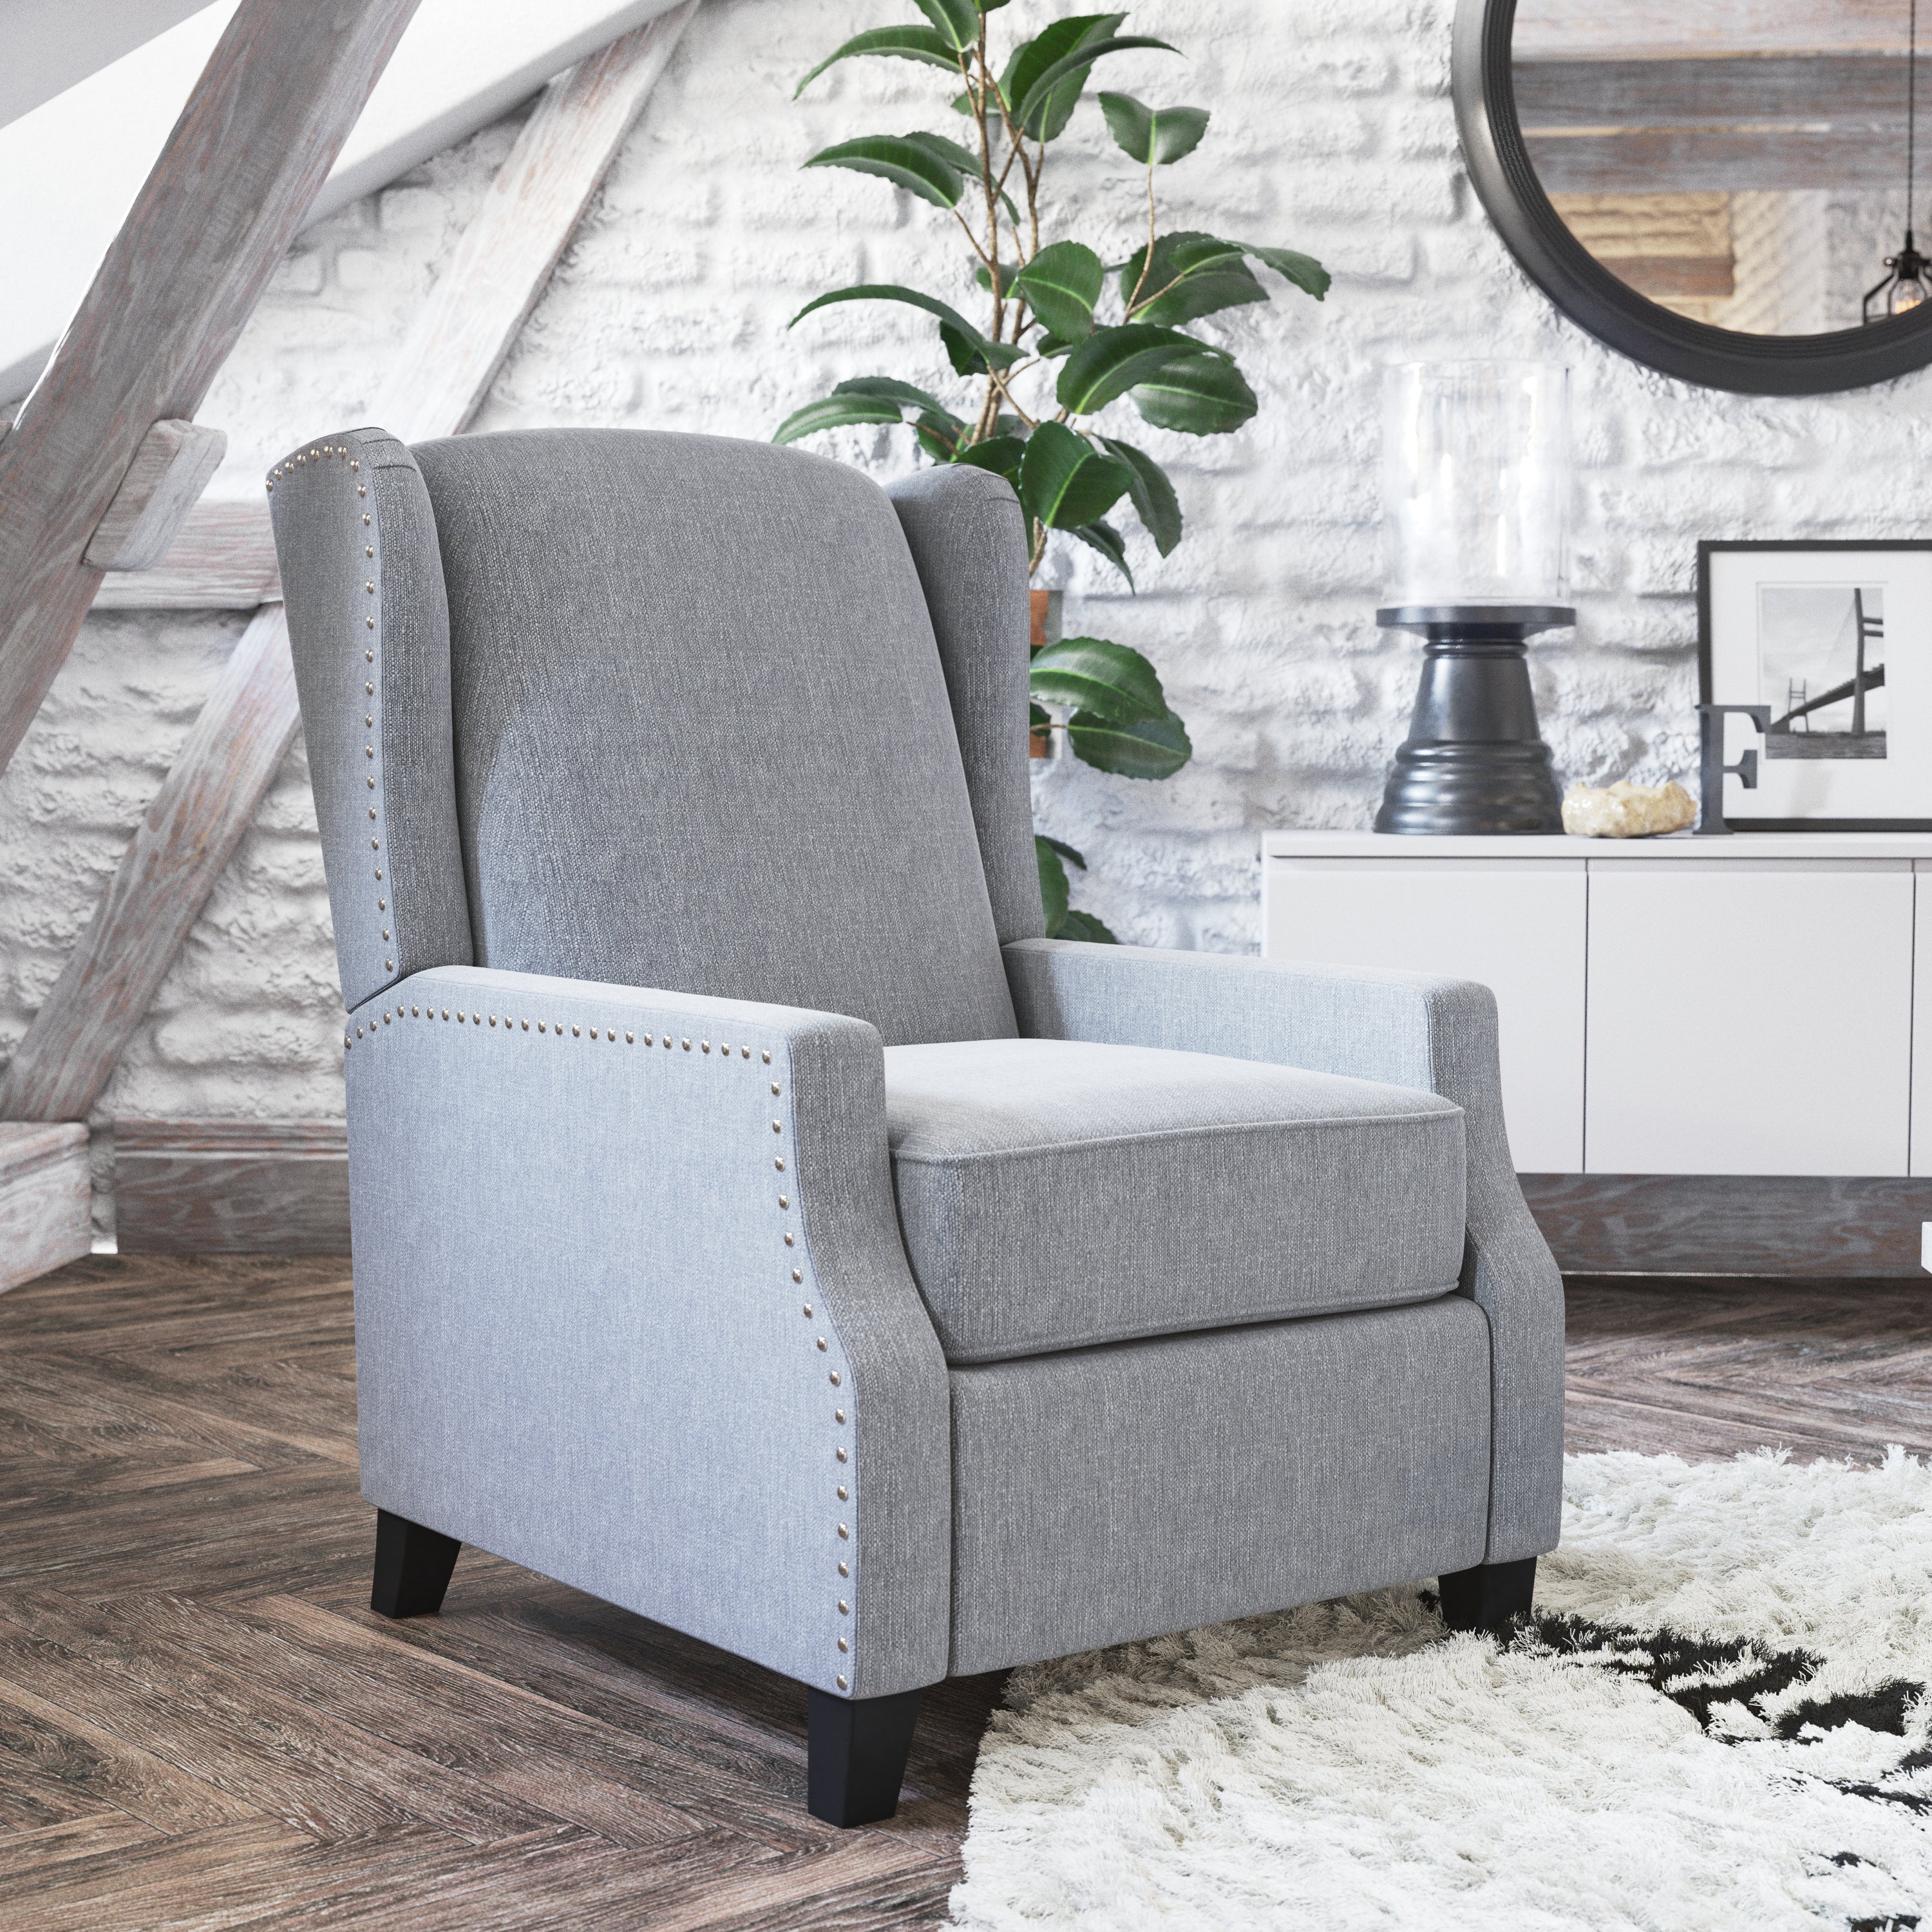 Prescott Traditional Style Slim Push Back Recliner Chair-Wingback Recliner with Polyester Fabric Upholstery-Accent Nail Trim-Push Back Recliners-Flash Furniture-Wall2Wall Furnishings